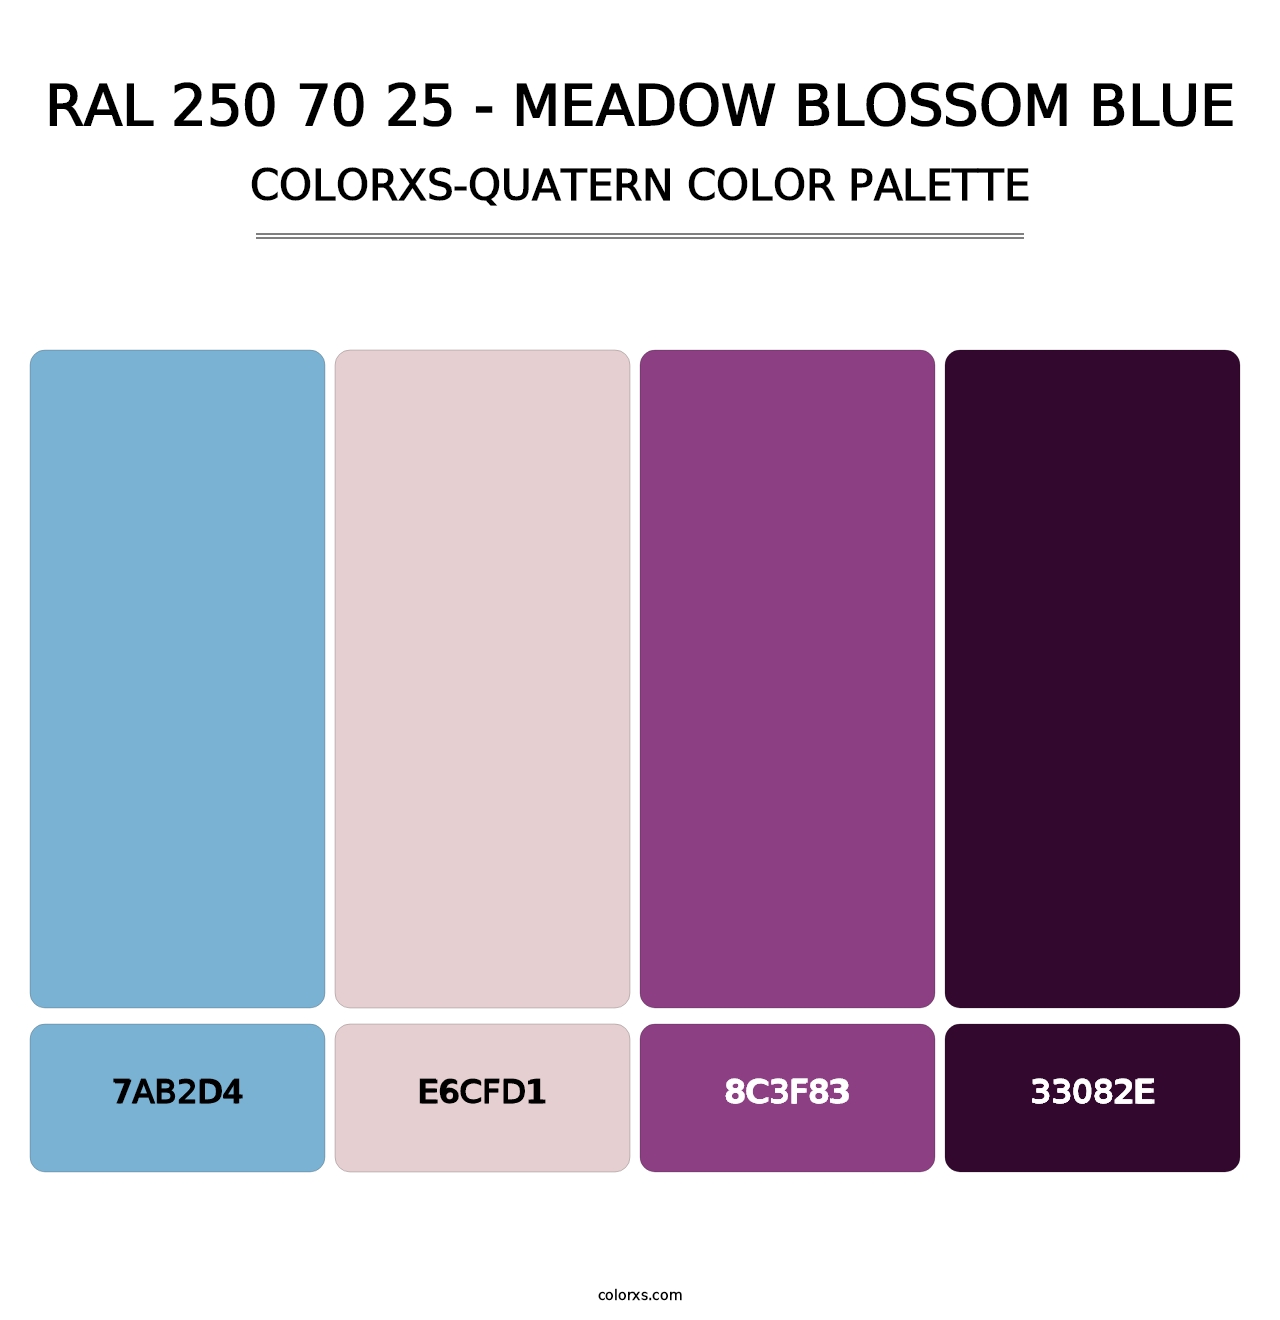 RAL 250 70 25 - Meadow Blossom Blue - Colorxs Quatern Palette